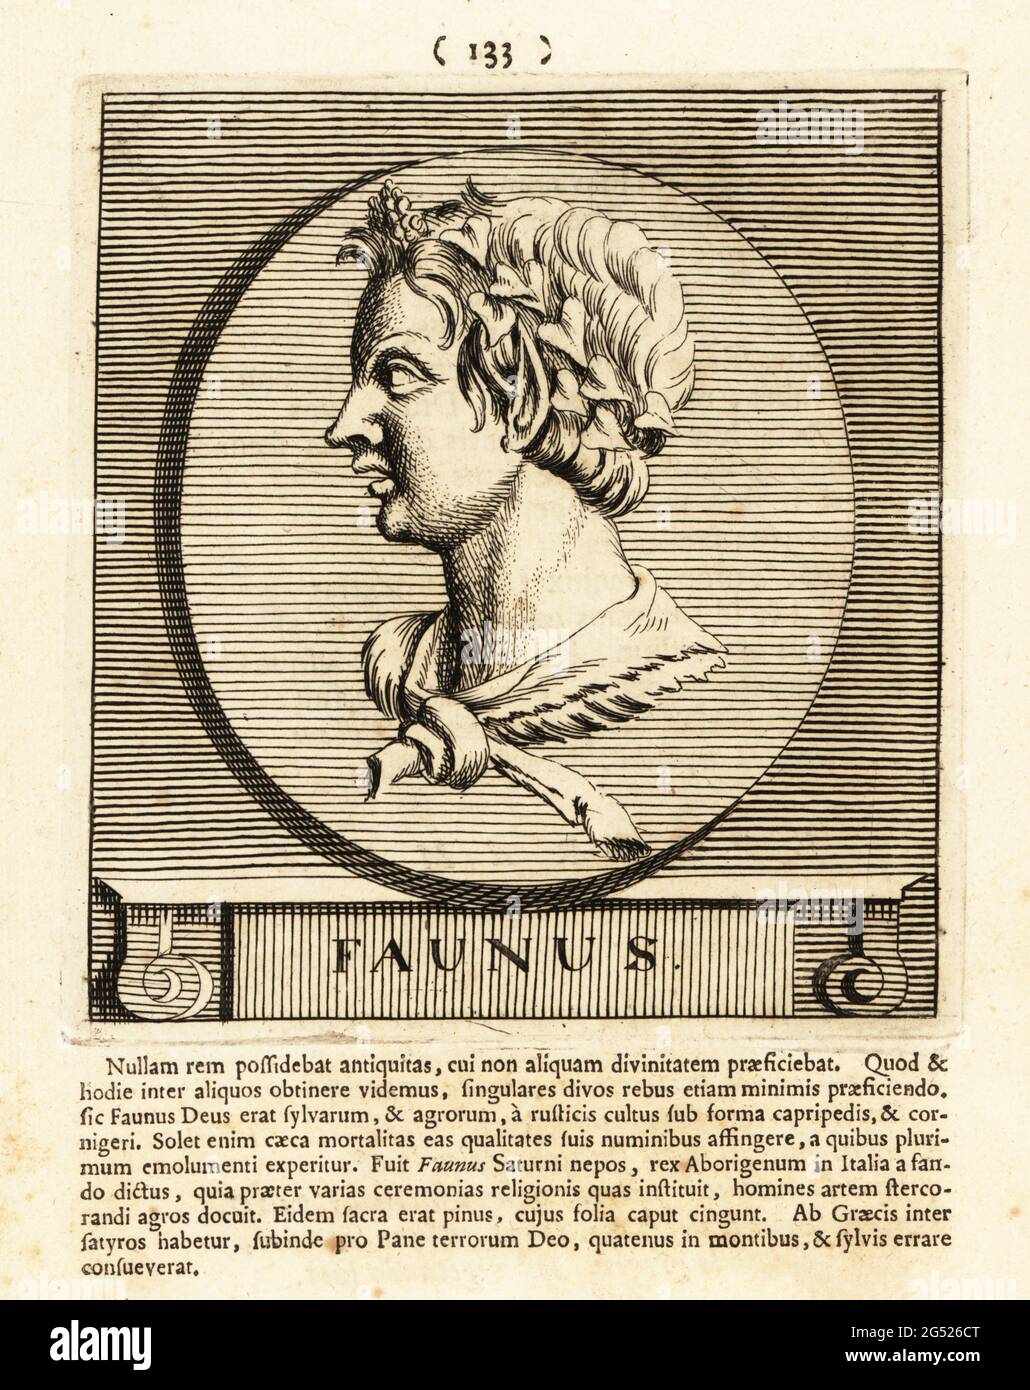 Faunus, Roman god of the forest, plains and fields. When he made cattle fertile, he was called Inuus. Equated with the Greek god Pan. Copperplate engraving by Pieter Bodart (1676-1712) from Henricus Spoor’s Deorum et Heroum, Virorum et Mulierum Illustrium Imagines Antiquae Illustatae, Gods and Heroes, Men and Women, Illustrated with Antique Images, Petrum, Amsterdam, 1715. First published as Favissæ utriusque antiquitatis tam Romanæ quam Græcæ in 1707. Henricus Spoor was a Dutch physician, classical scholar, poet and writer, fl. 1694-1716. Stock Photo